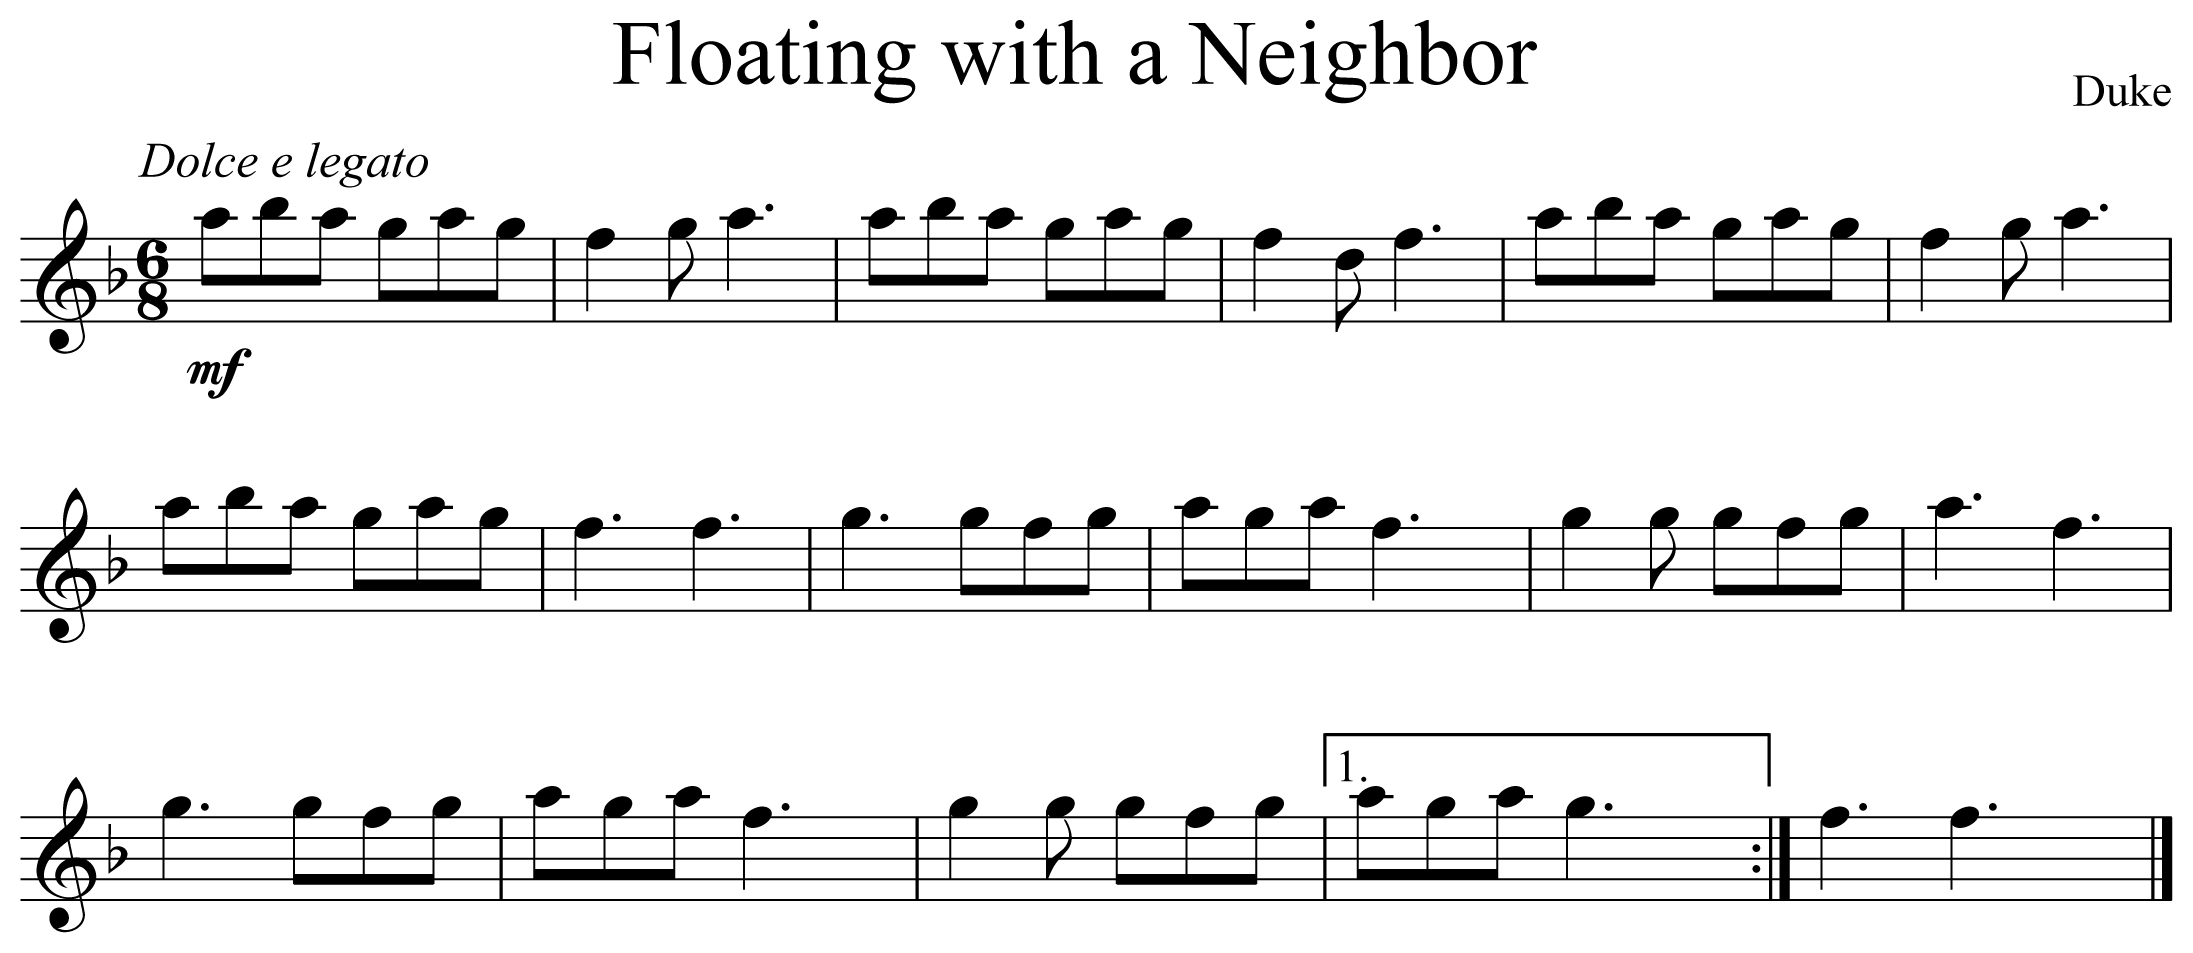 Floating with a Neighbor Notation Flute